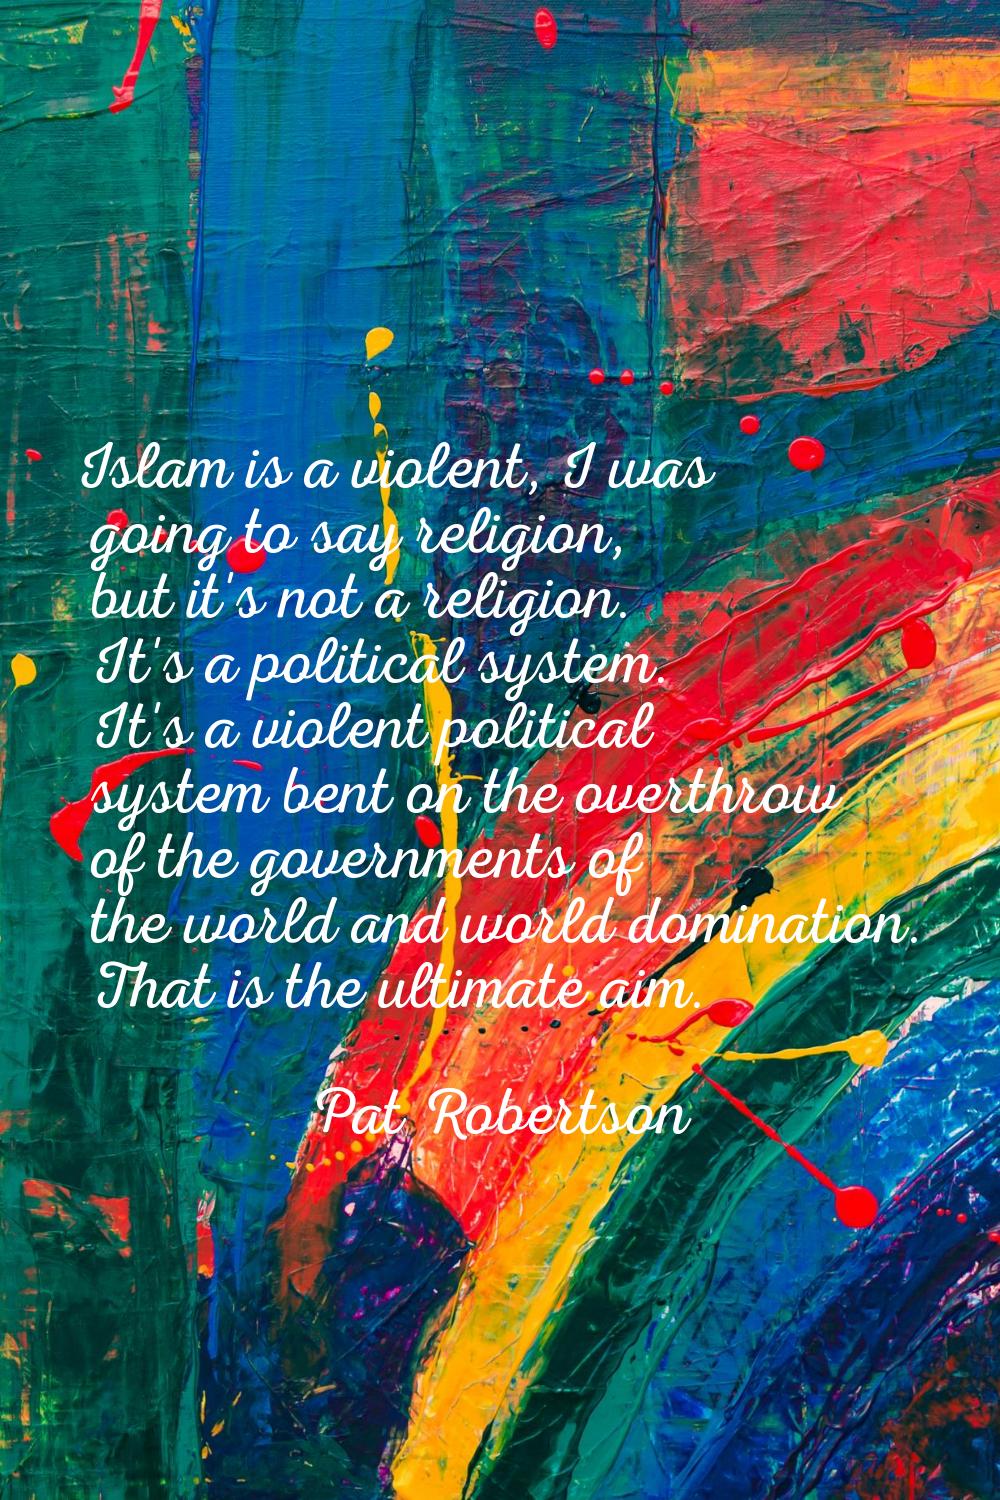 Islam is a violent, I was going to say religion, but it's not a religion. It's a political system. 